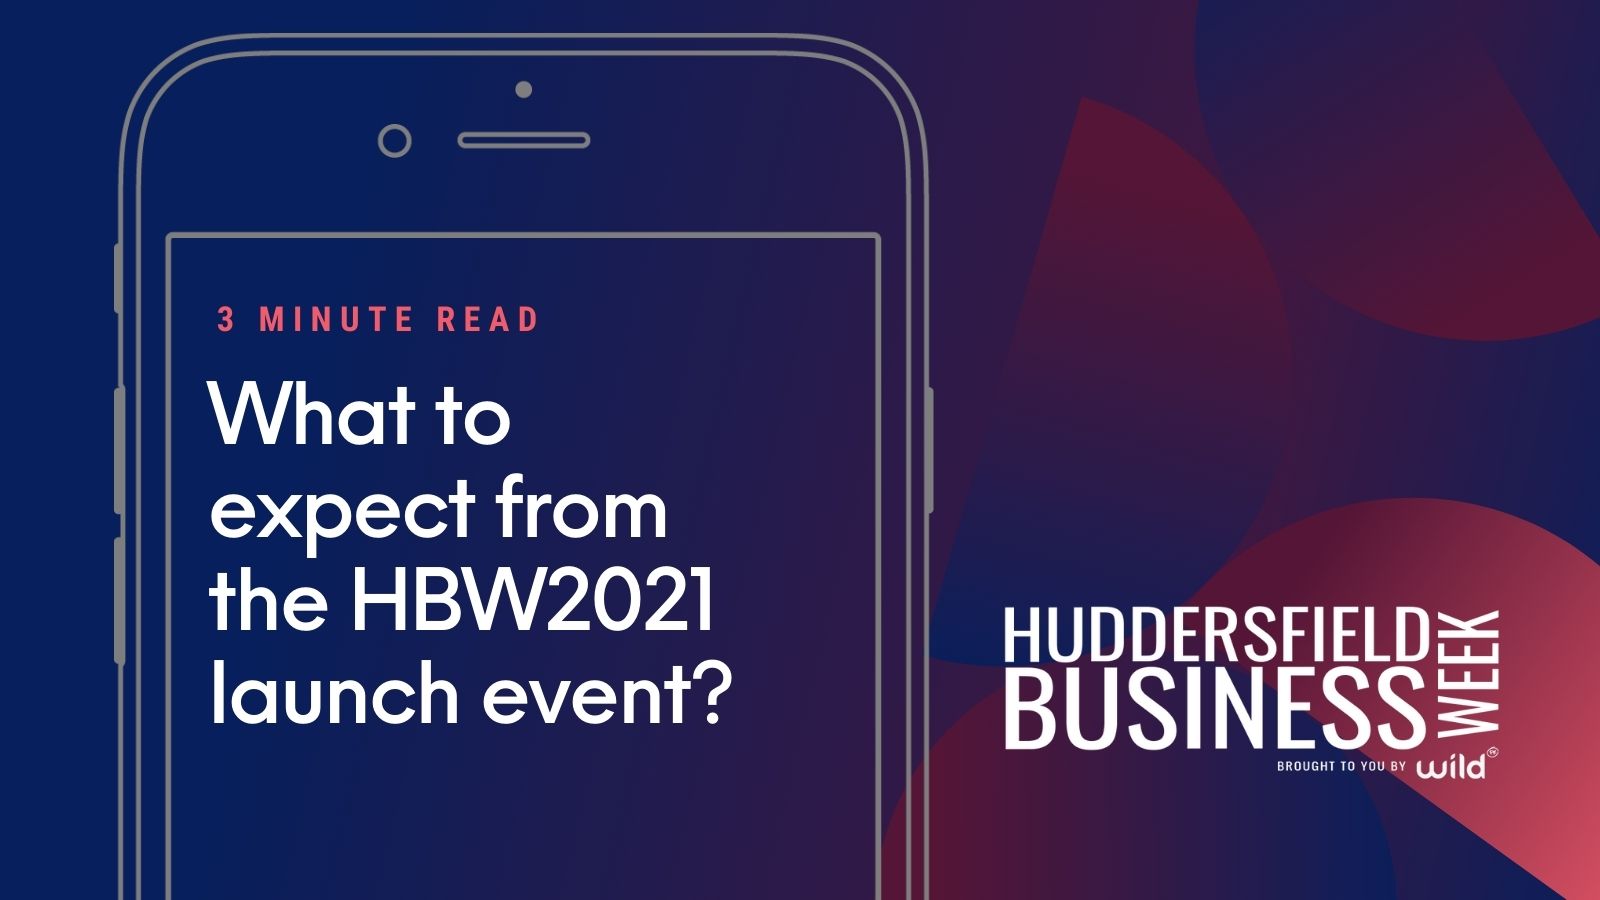 What to expect from the HBW launch event?